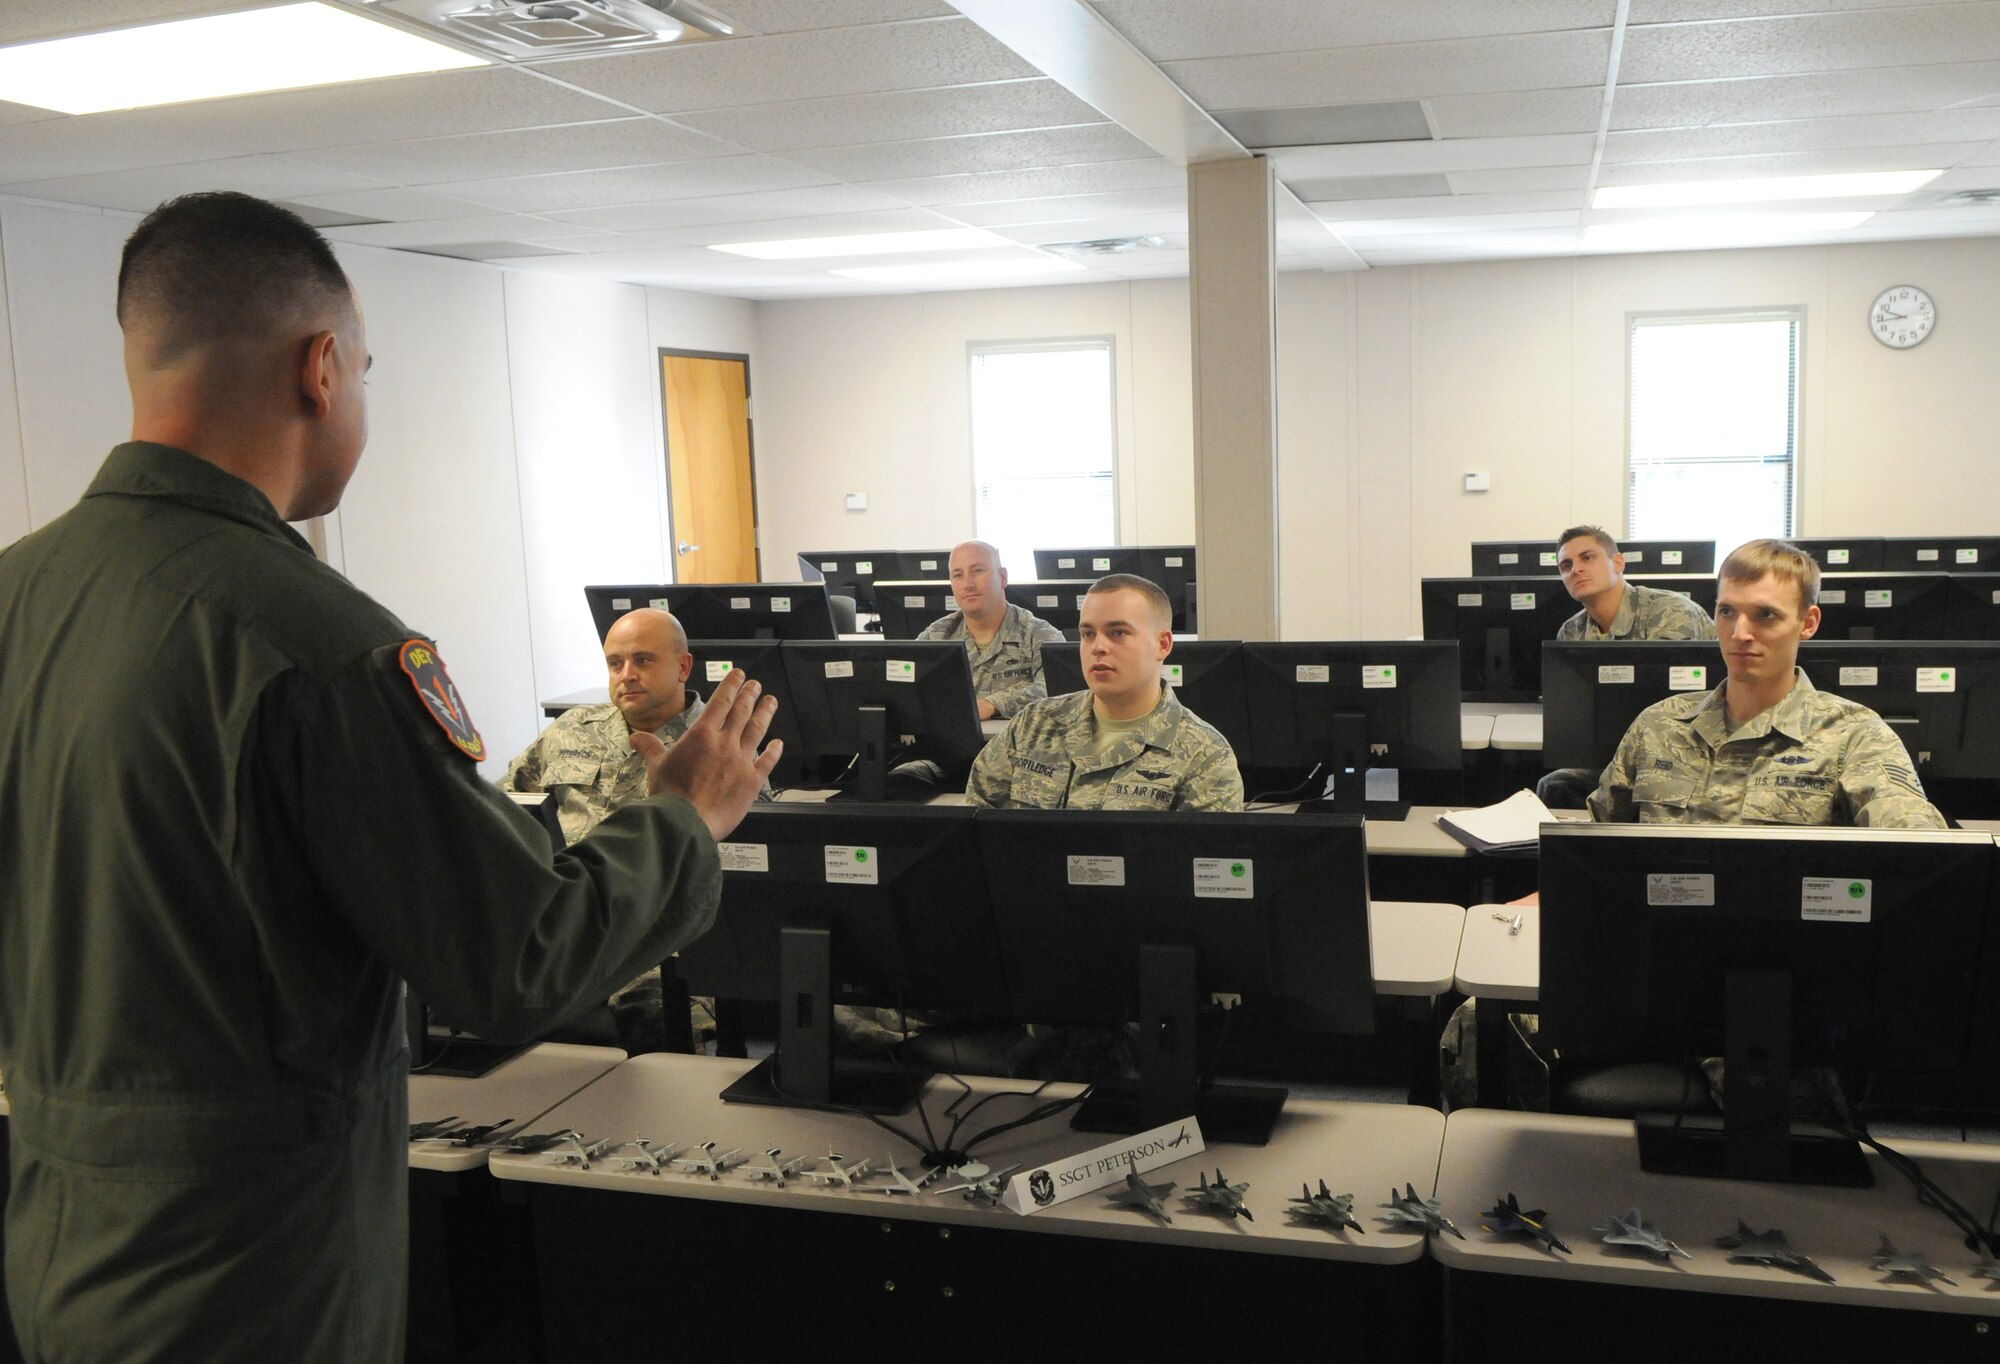 Tech. Sgt. Michael Arroyo (left), a Basic Sensor Operator Training course instructor, gives a final briefing to students (from left to right) Staff Sgt. Jason Peterson, Staff Sgt. Adam Rosen, Airman 1st Class Ronald Shortledge, Senior Airman Robert Babian and Staff Sgt. Jeremy Reid, prior to their graduation Sept. 18, following 20 days of academic instruction. Upon graduation, students in this inaugural class will earn the Air Force Specialty Code 1U0X1, sensor operators.  (U.S. Air Force photo/Rich McFadden)